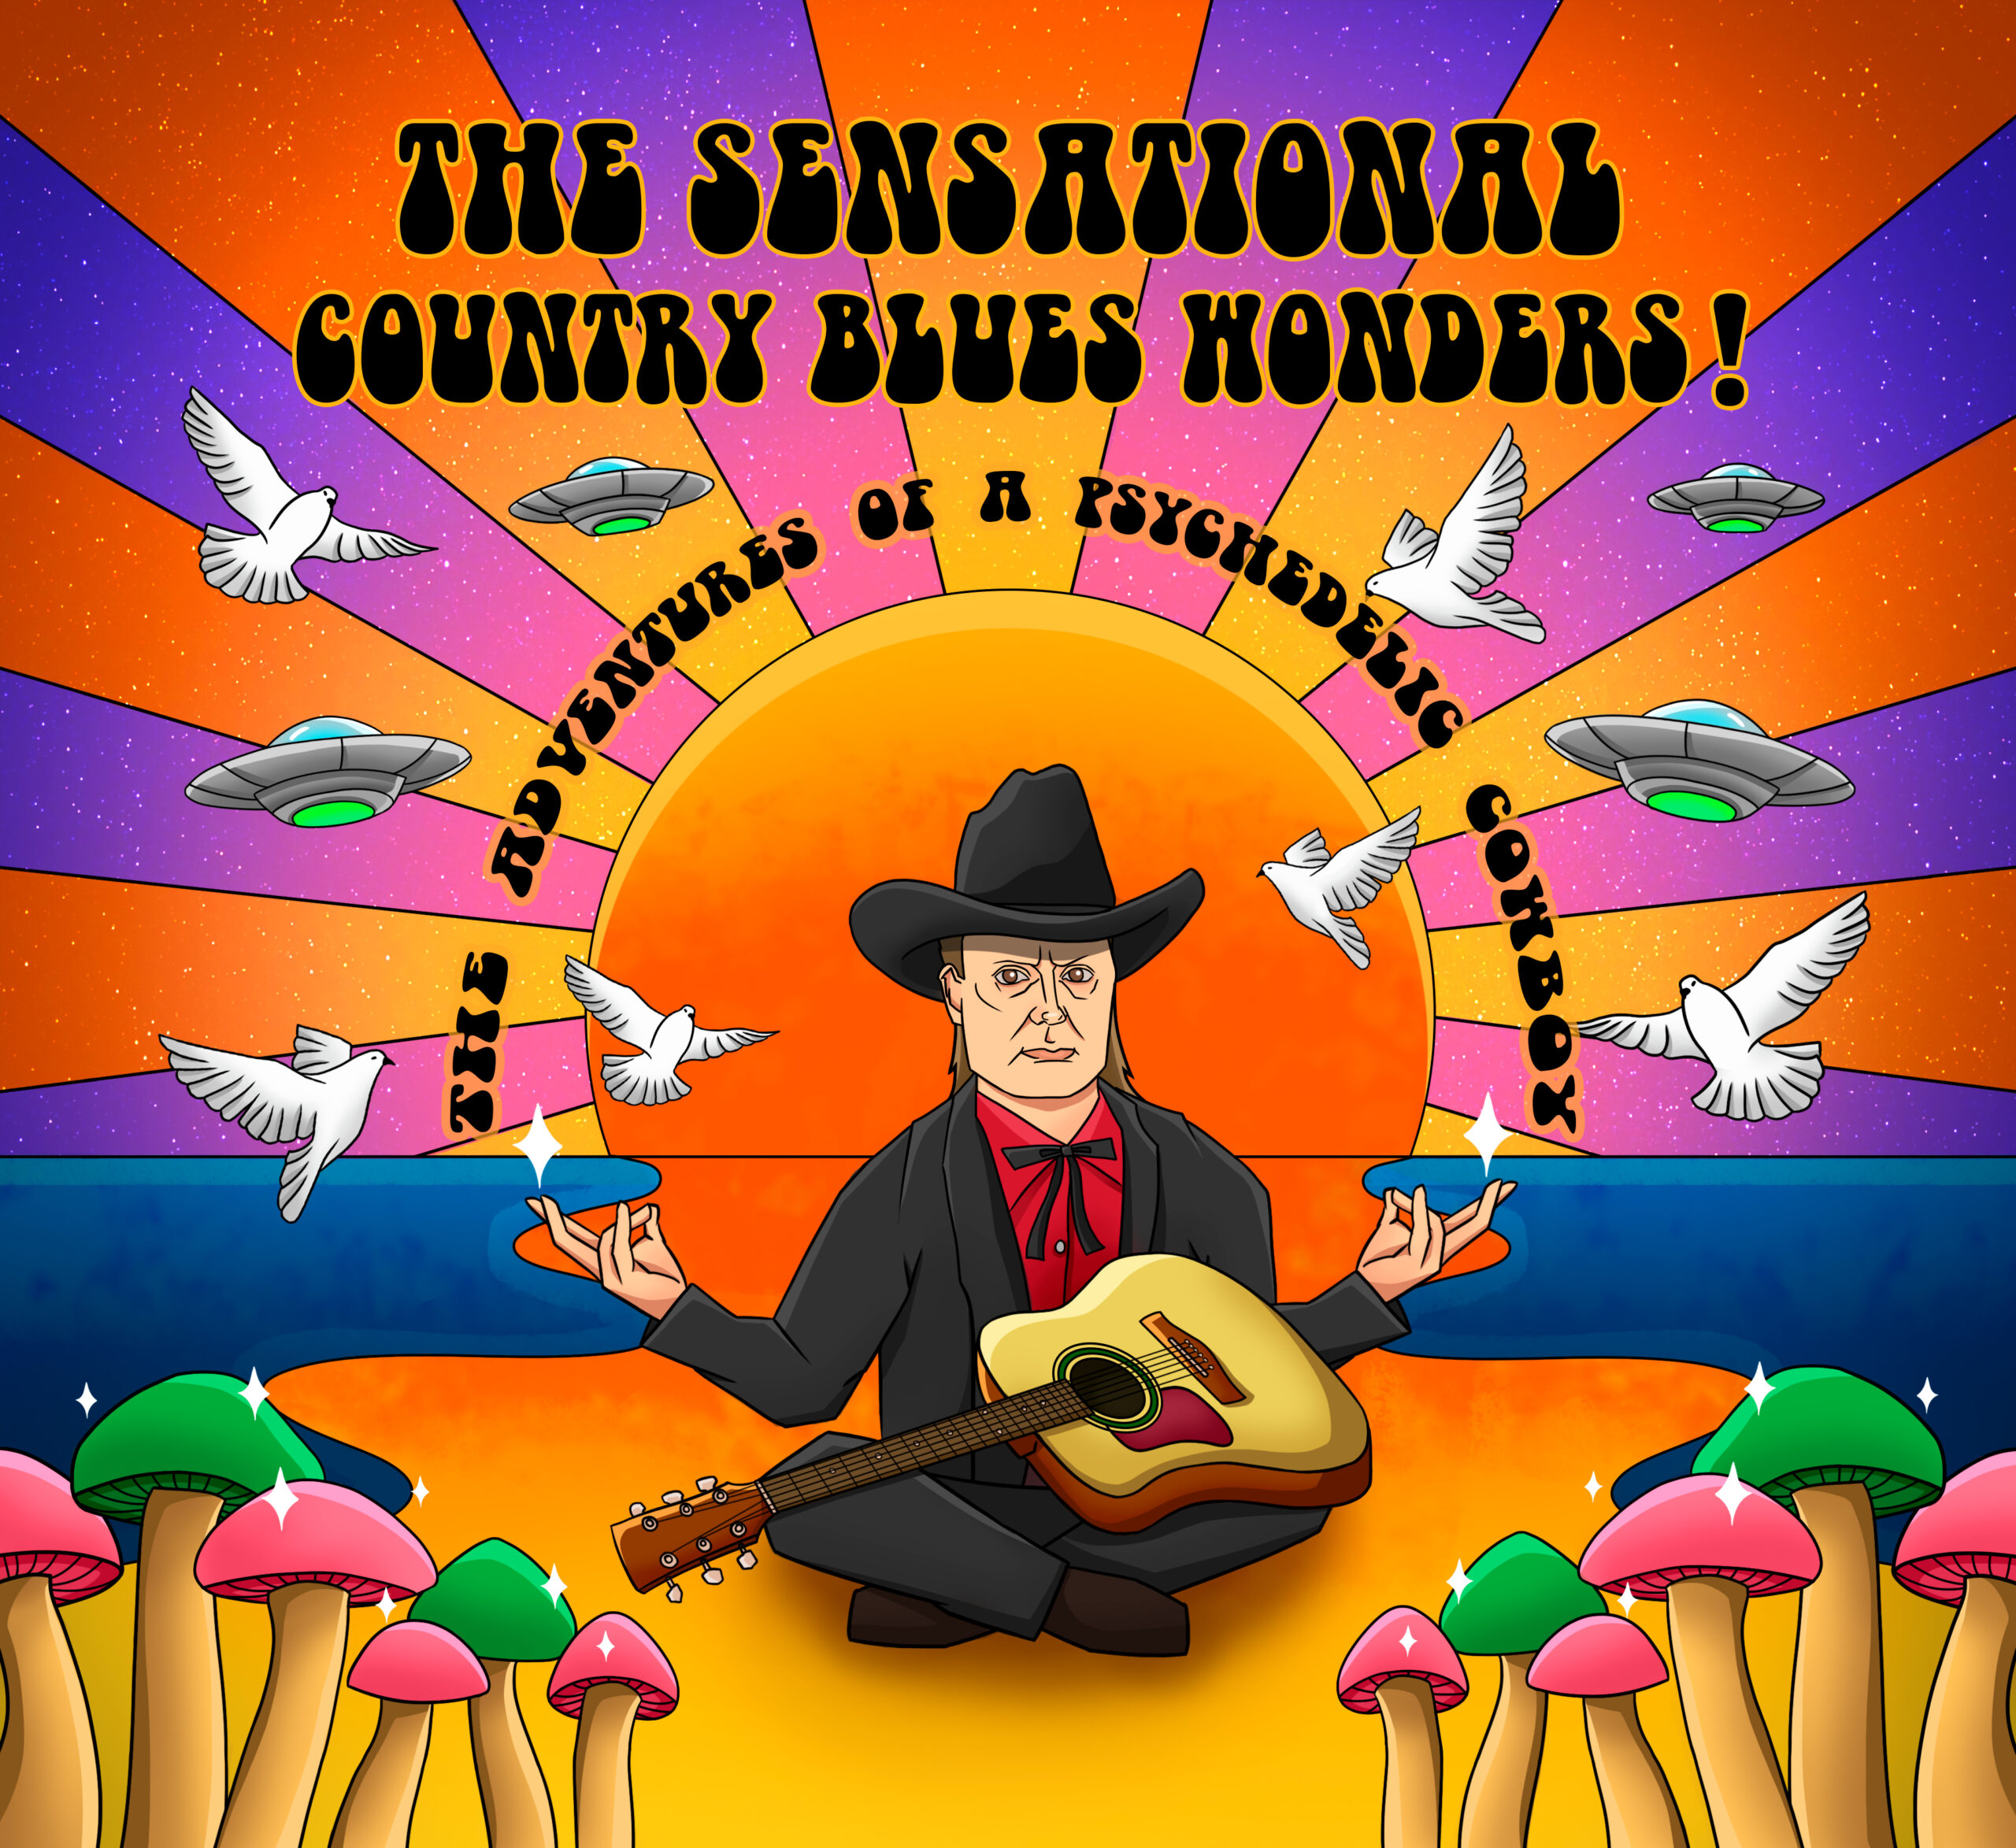 THE SENSATIONAL COUNTRY BLUES WONDERS! RETURN WITH THE ADVENTURES OF A PSYCHEDELIC COWBOY